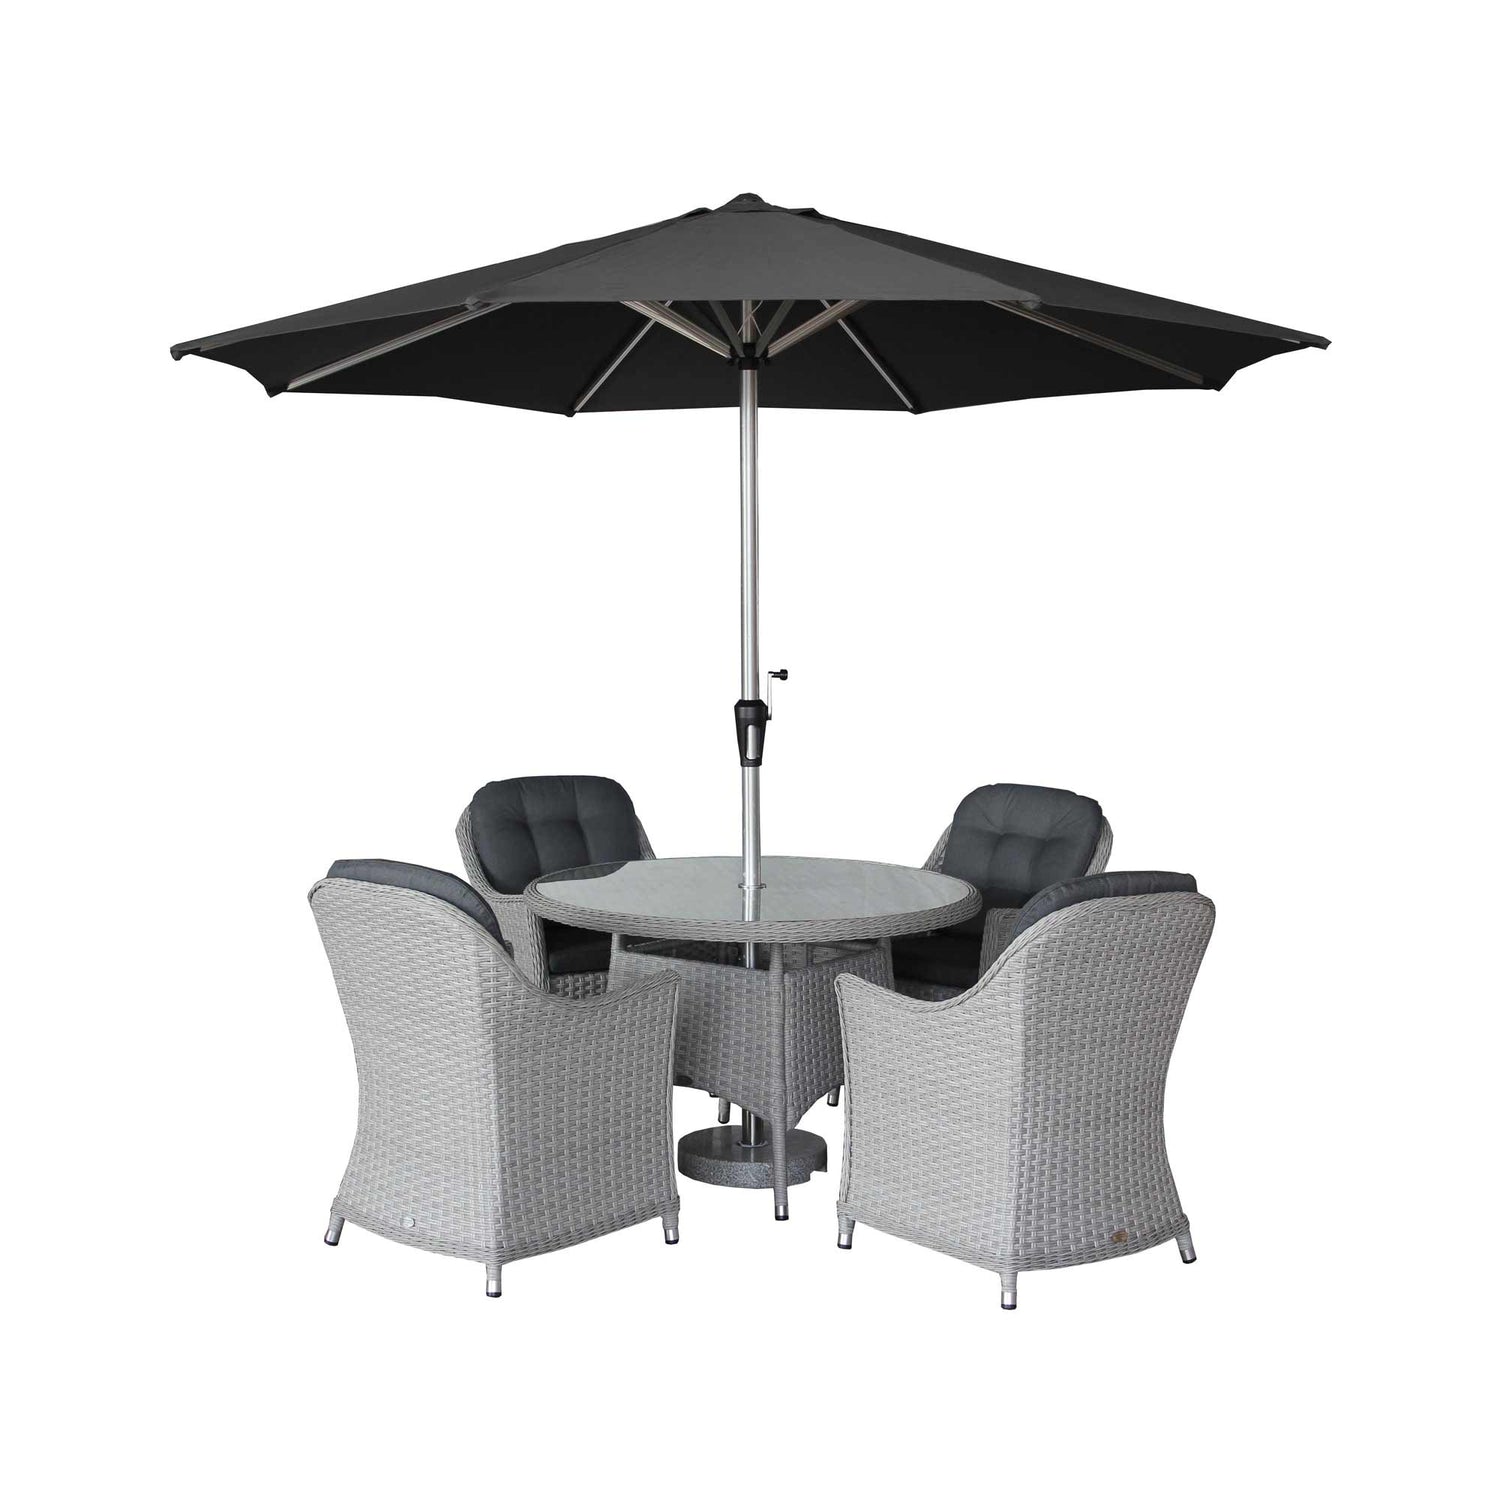 X24WCWT120RD1-Wentworth-120cm-Round-Table-with-4-Armchairs,-Parasol-&-Base-4-seater-set.jpg